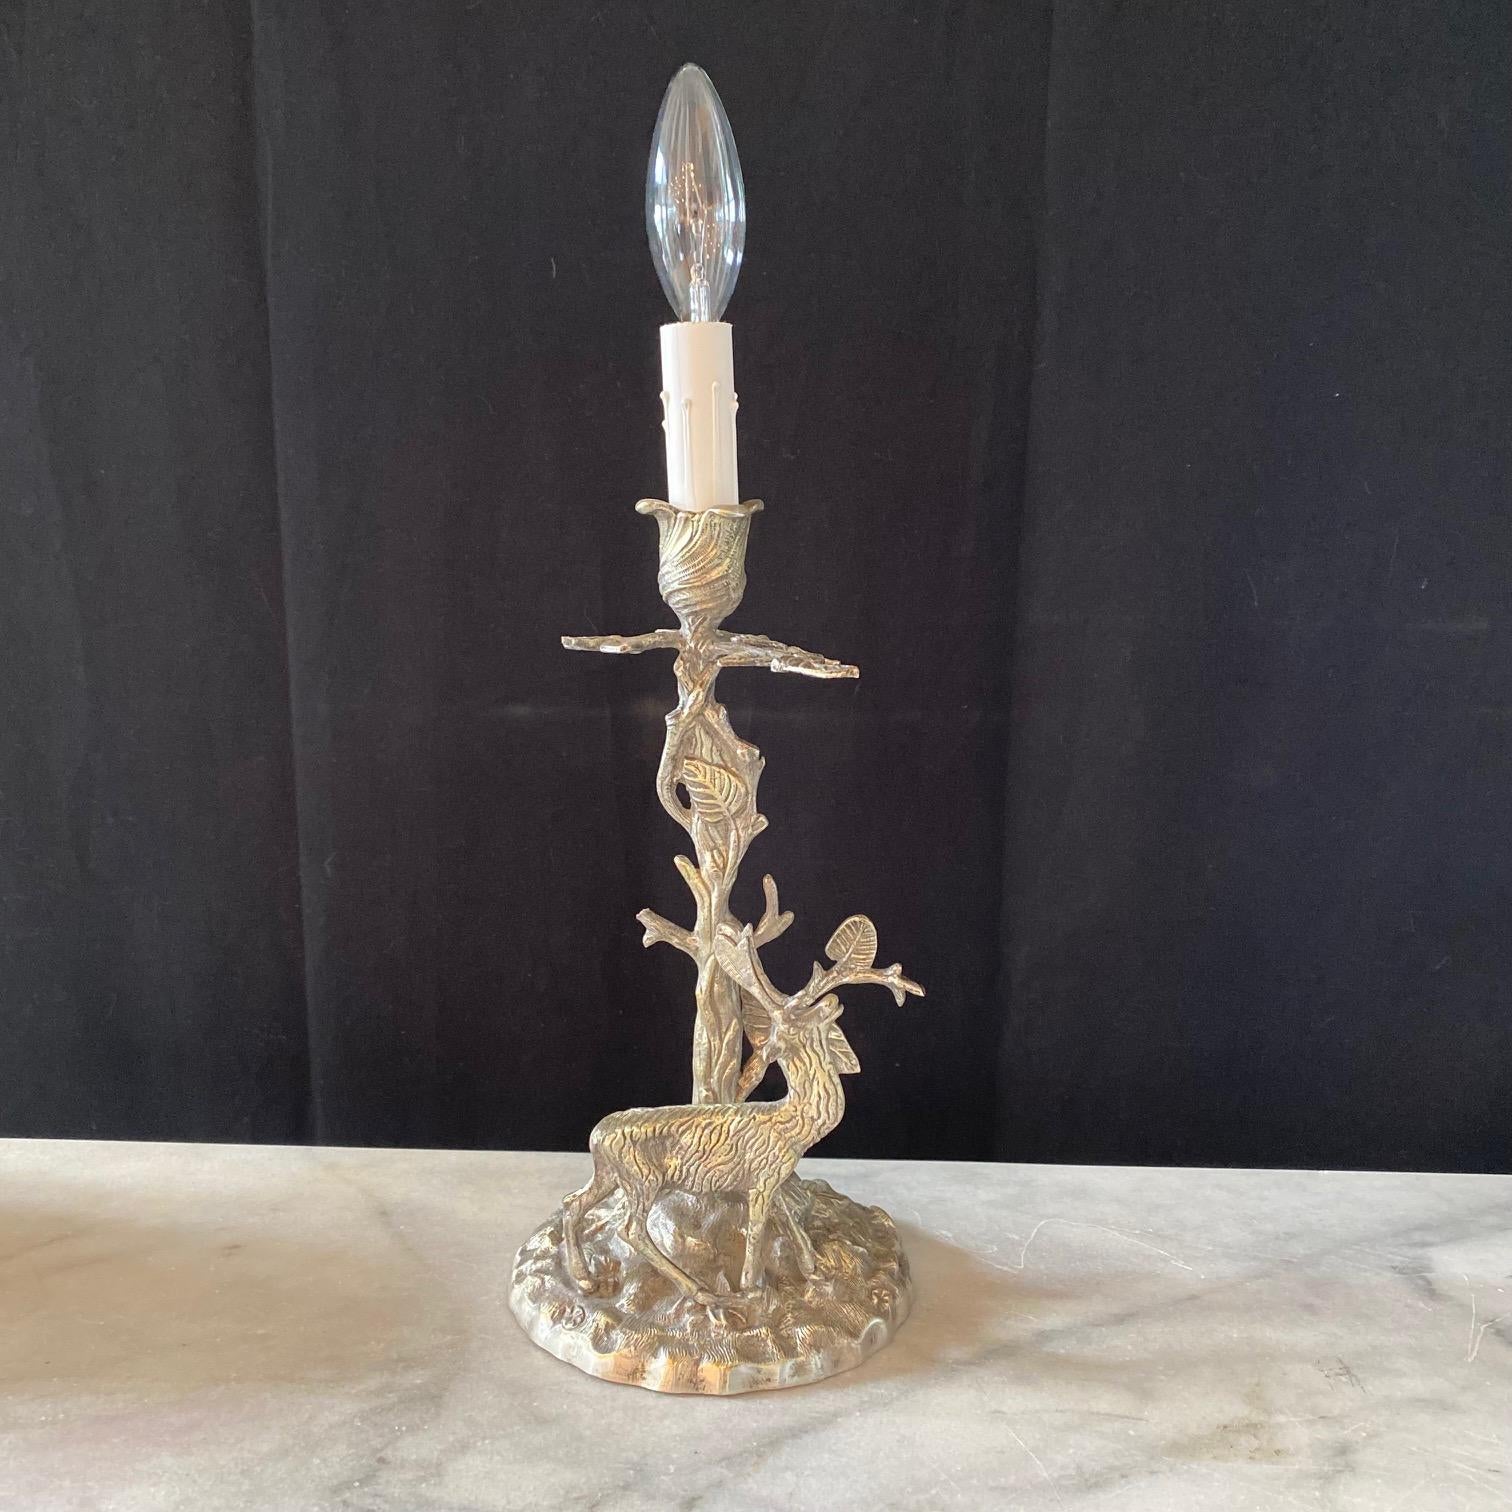  Silver Plated Bronze Deer Sculpture Table Lamp with Leaves and Twigs  6